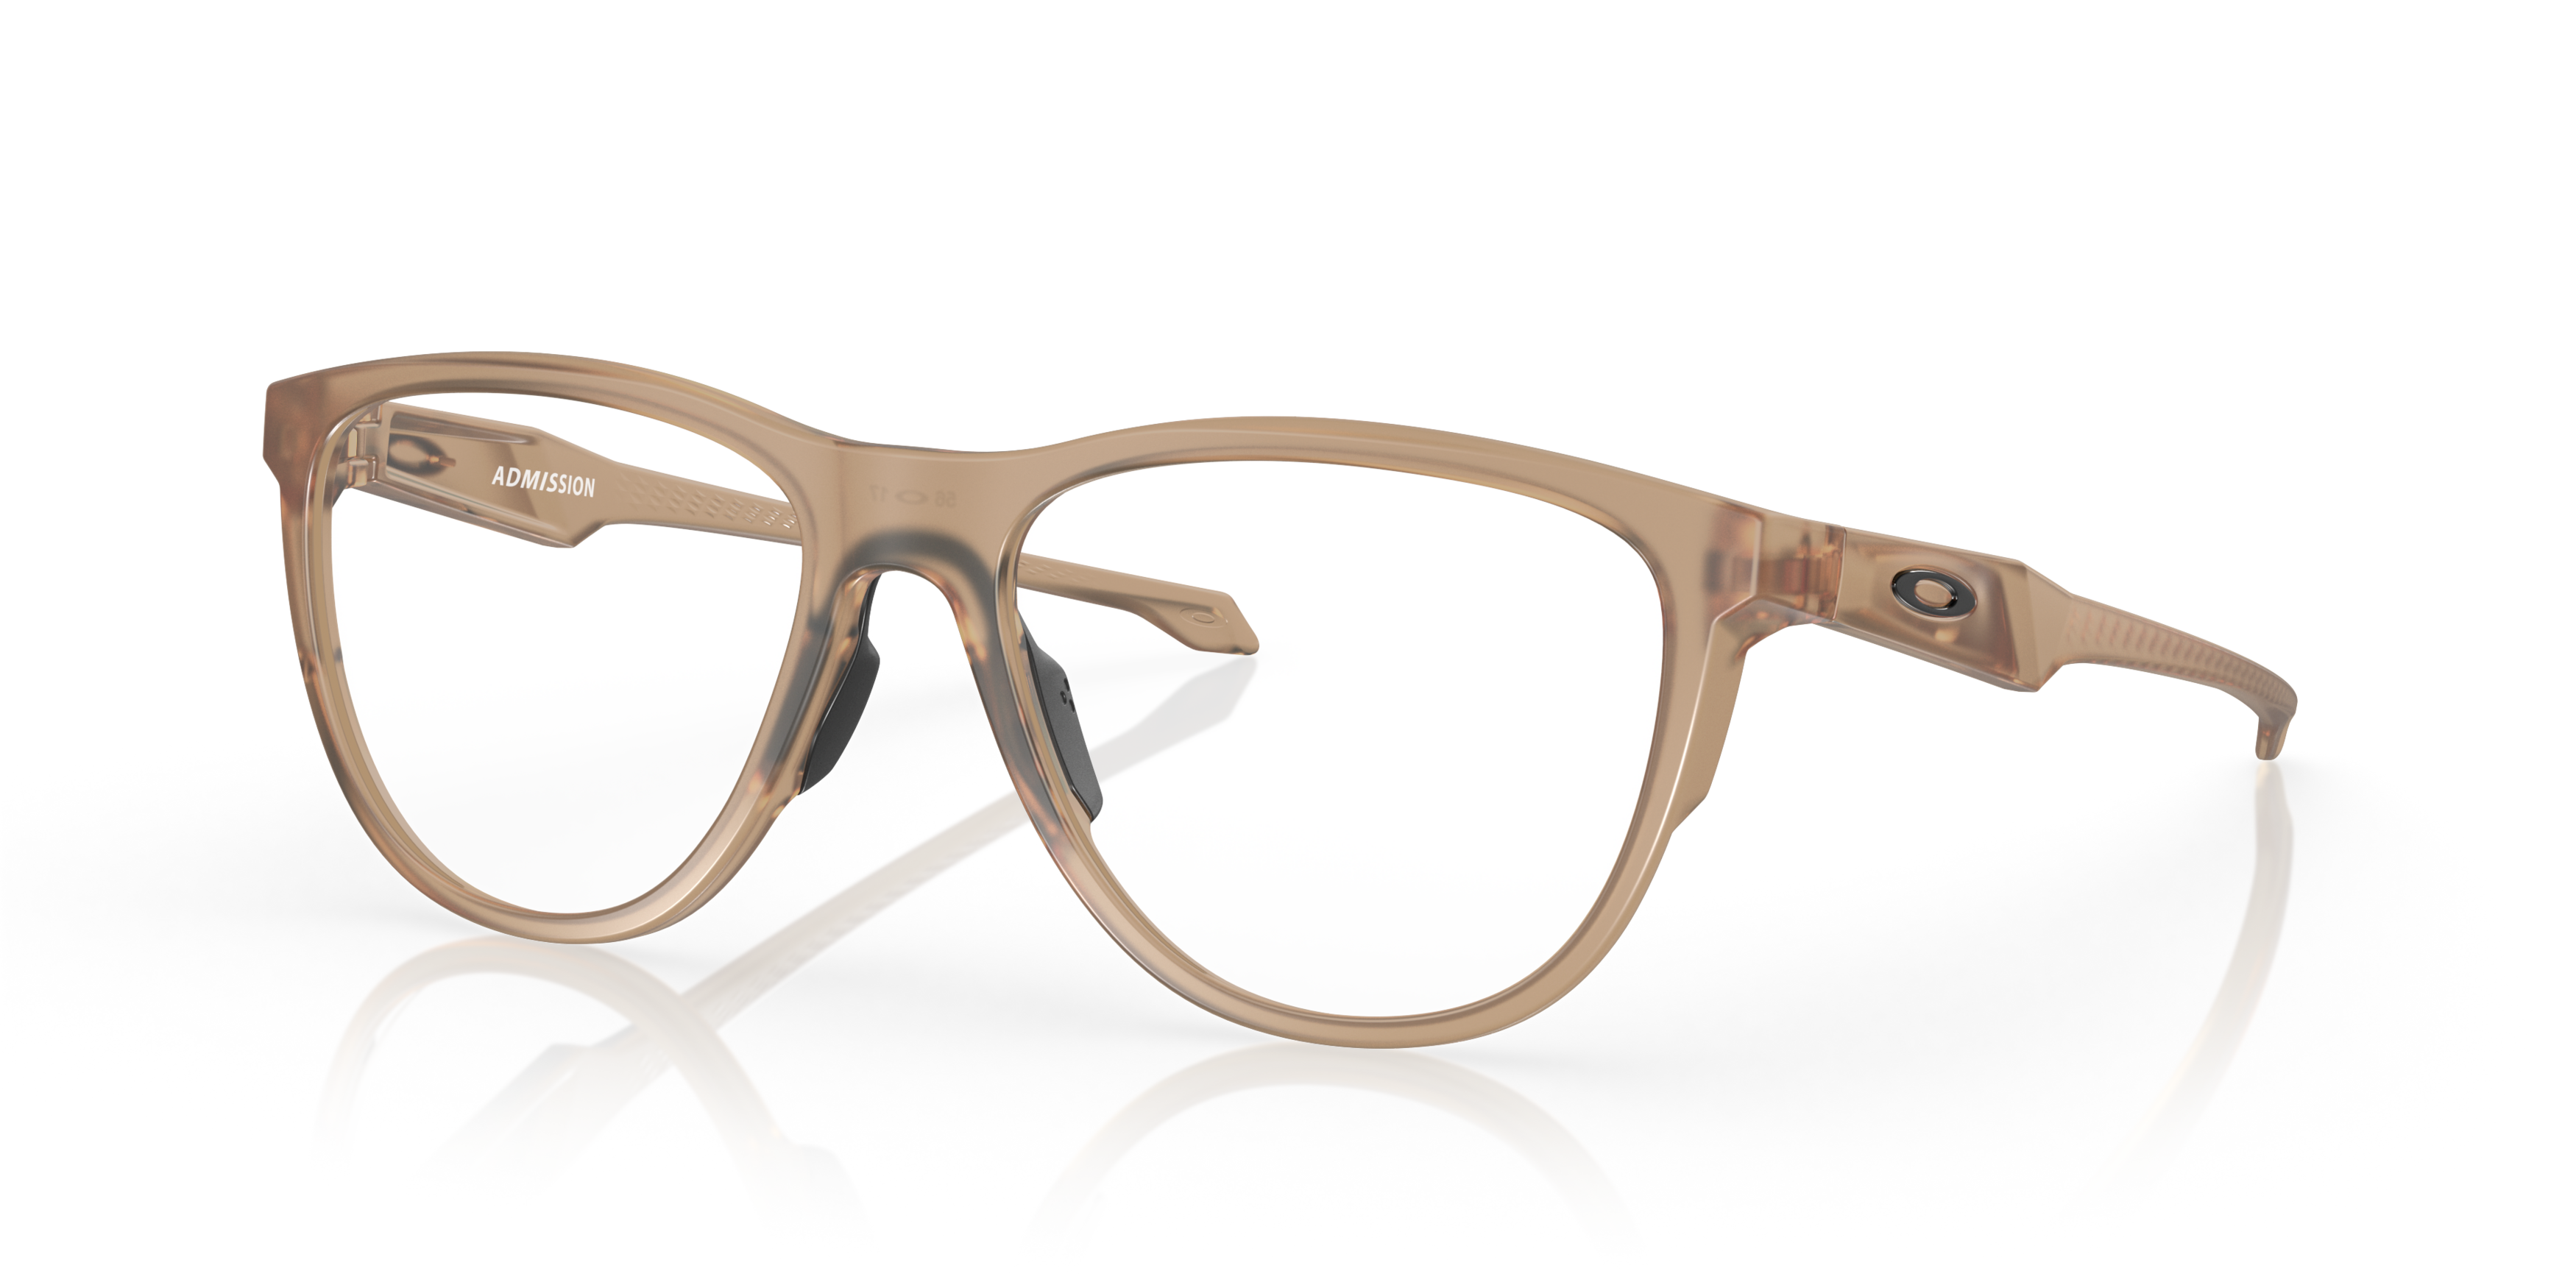 Angle_Left01 Oakley OX 8056 (805604) Glasses Transparent / Brown